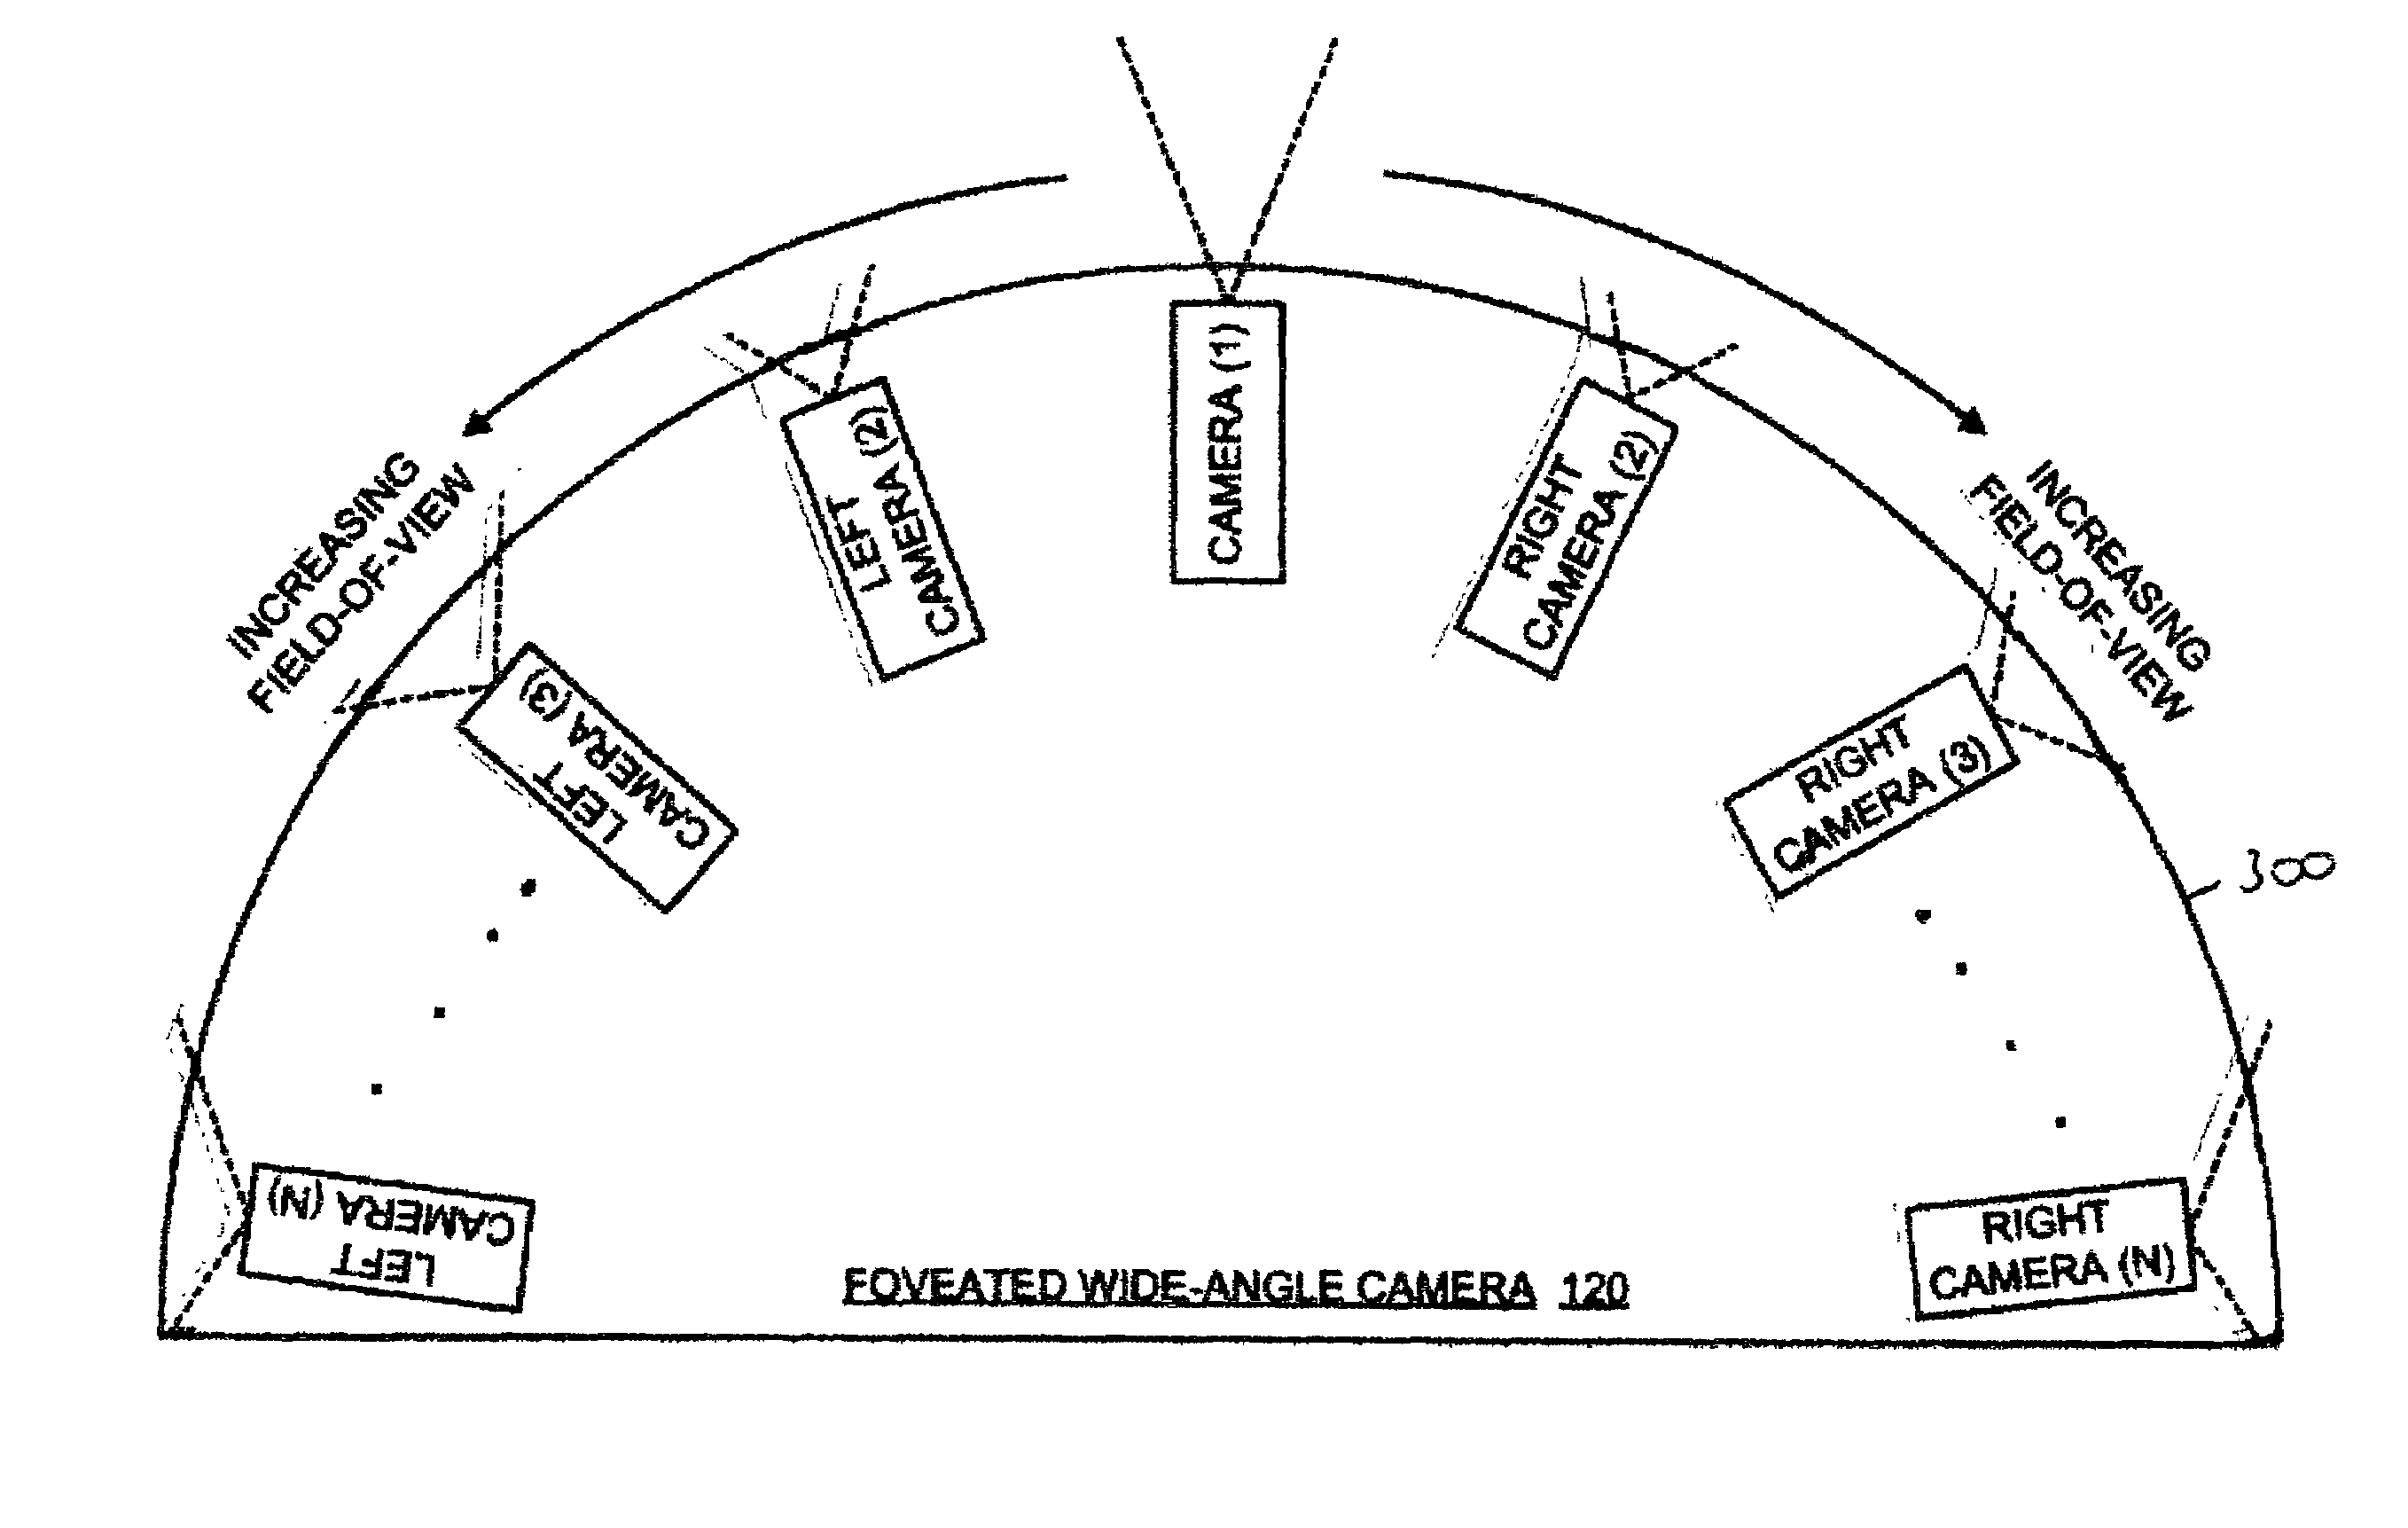 Foveated wide-angle imaging system and method for capturing and viewing wide-angle images in real time